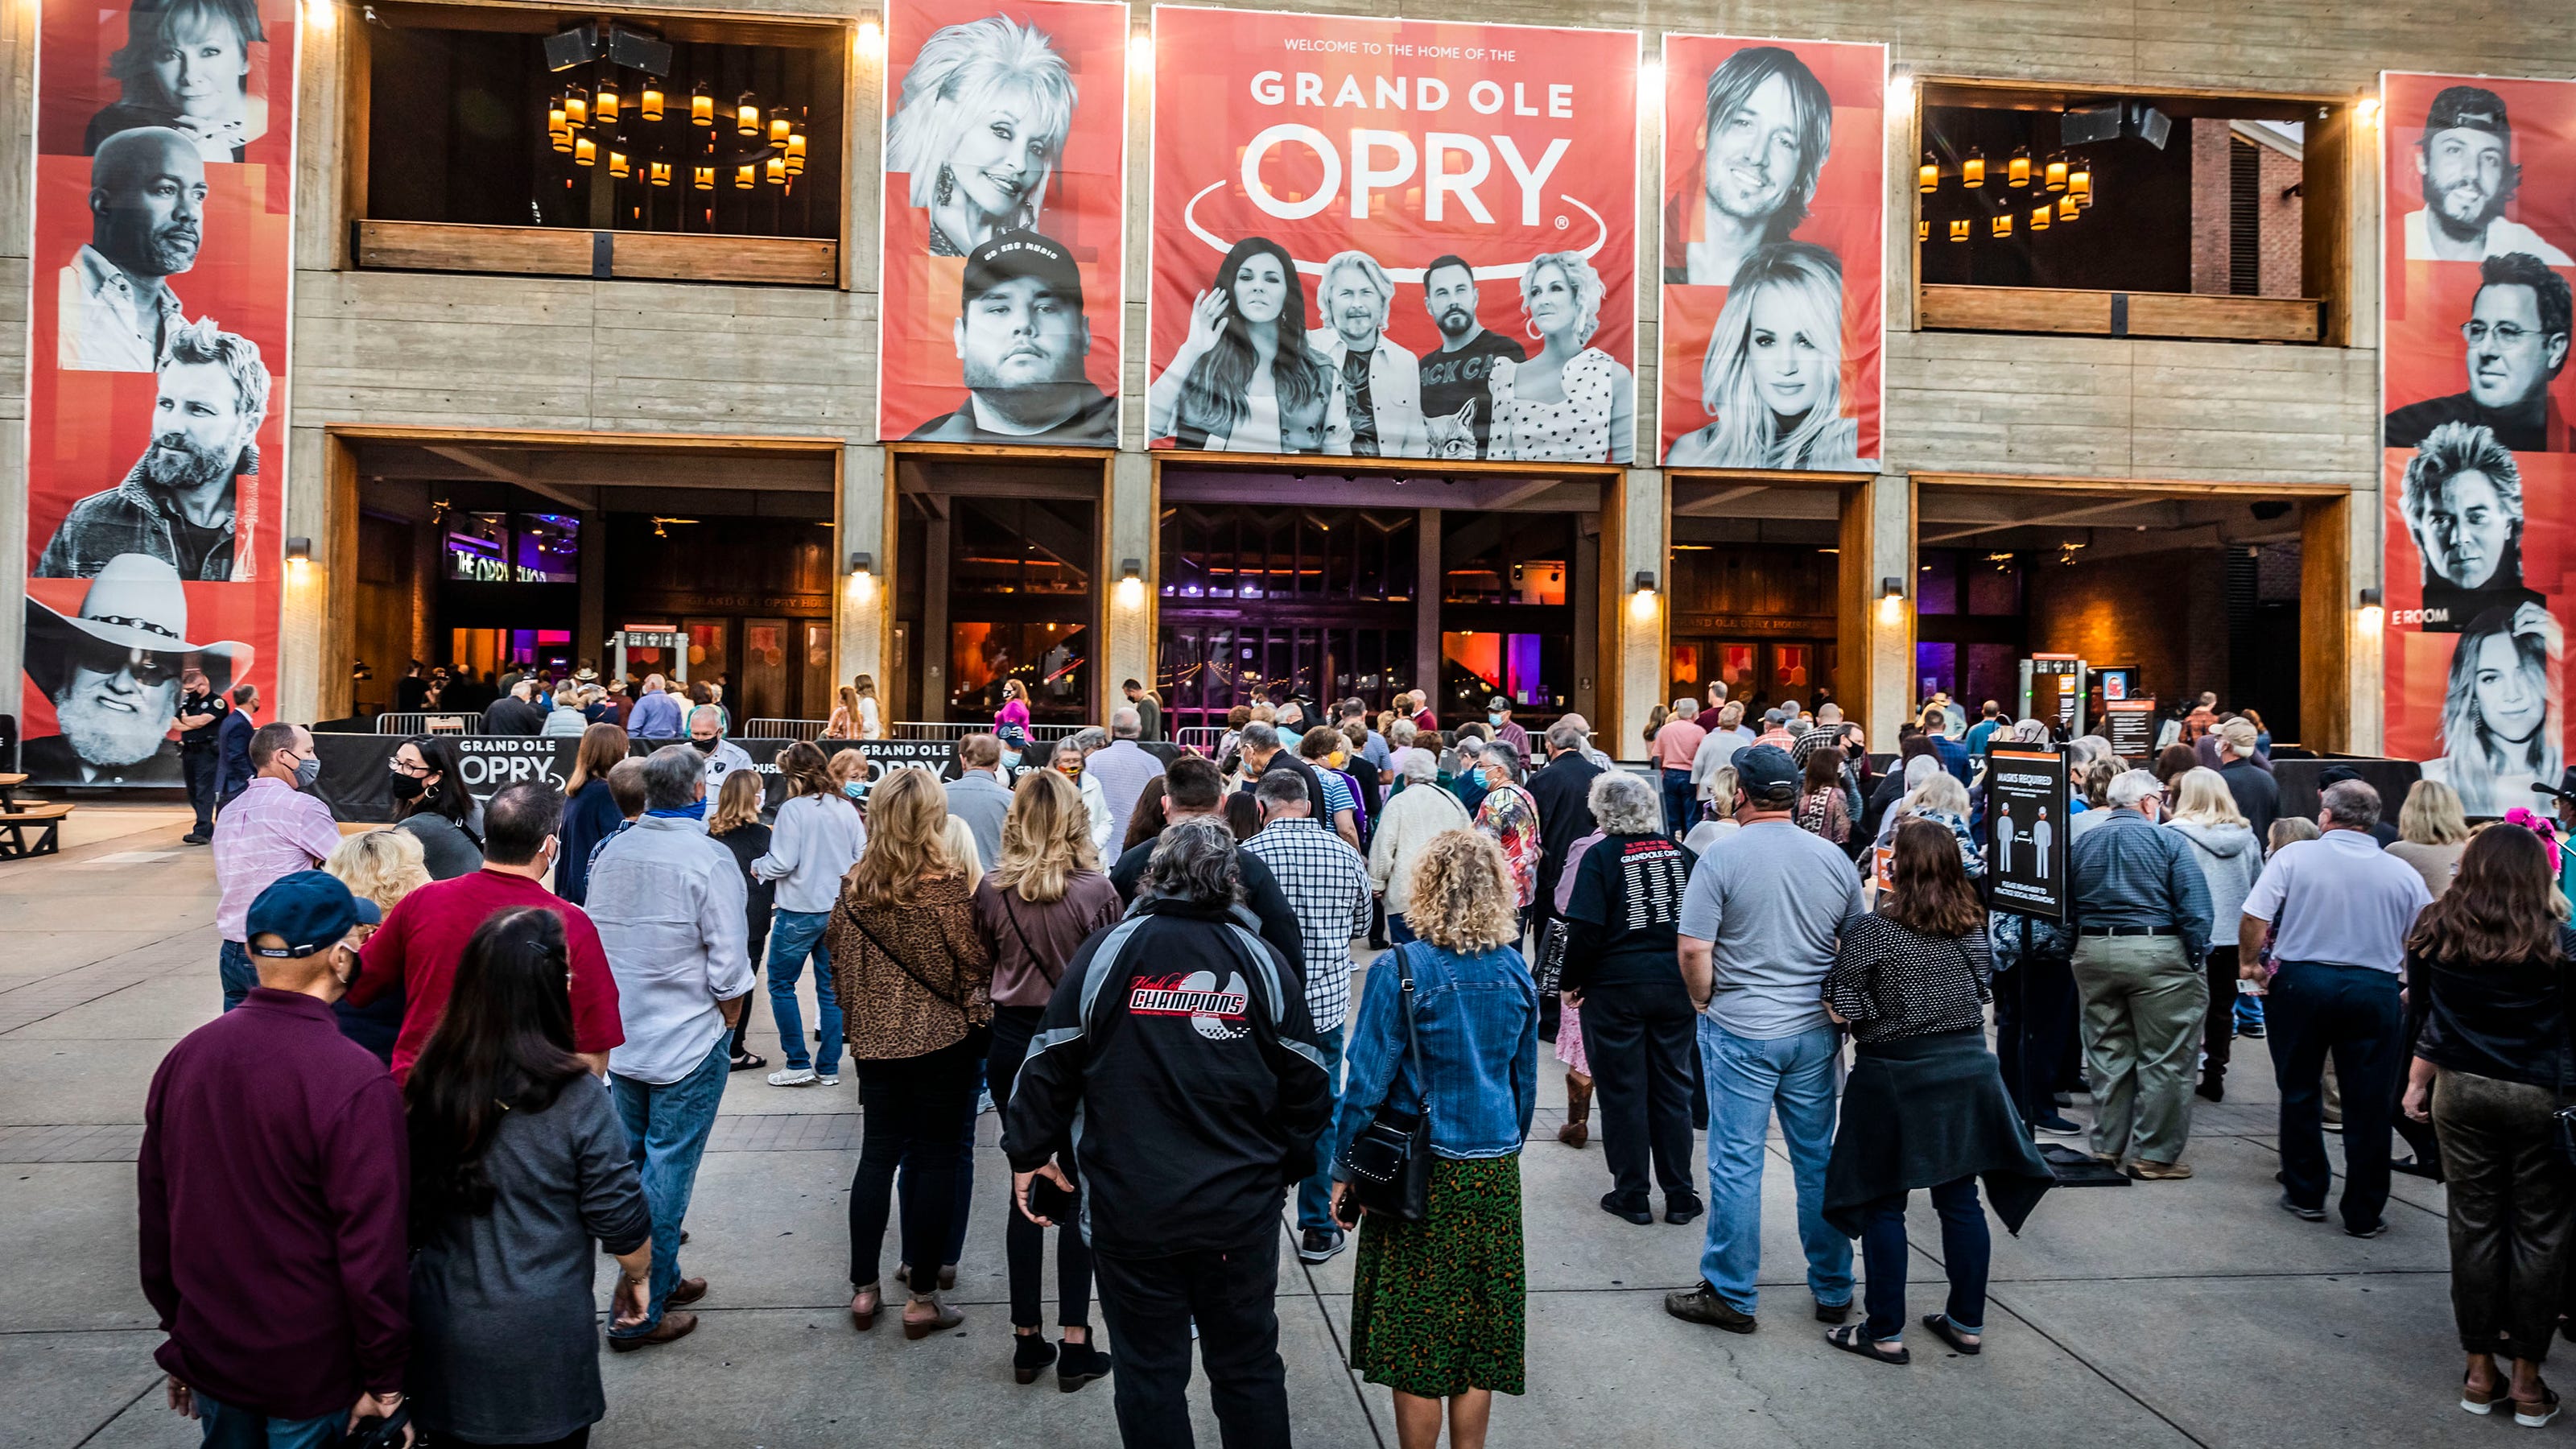 Grand Ole Opry adds Friday nights, expands shows to two hours